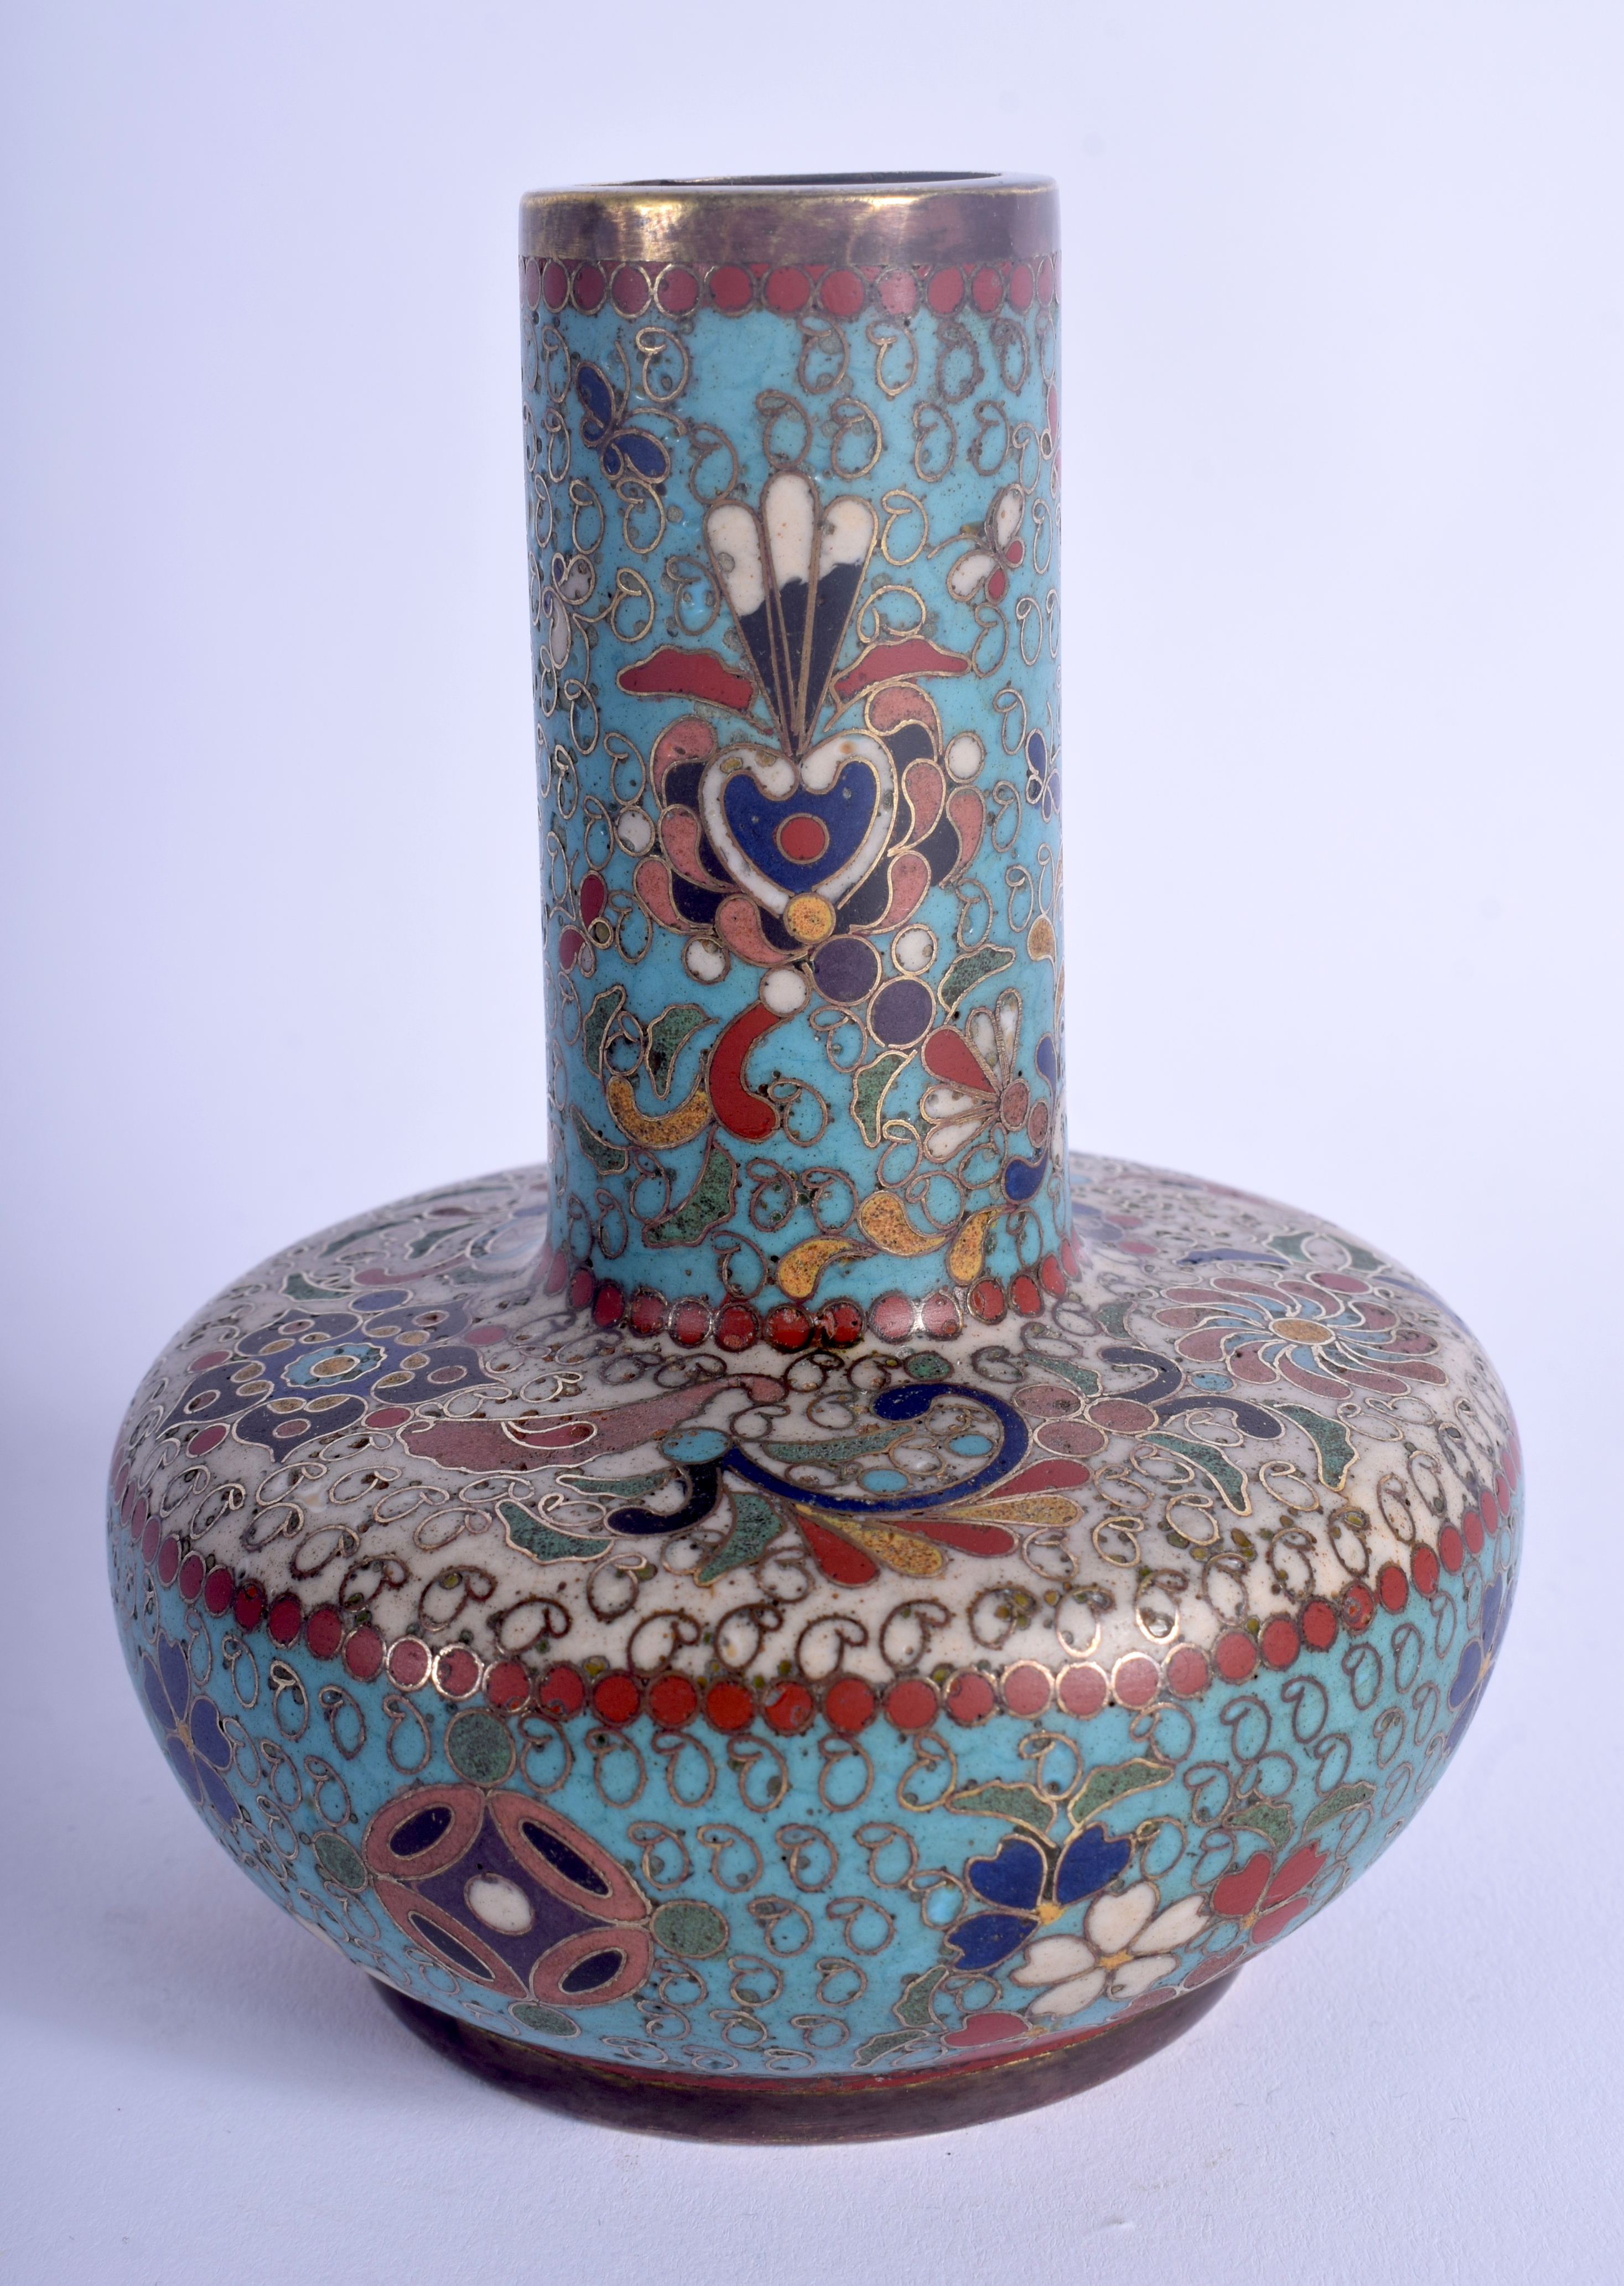 A 19TH CENTURY JAPANESE MEIJI PERIOD CLOISONNE ENAMEL VASE decorated with swirling foliage. 10.5 cm